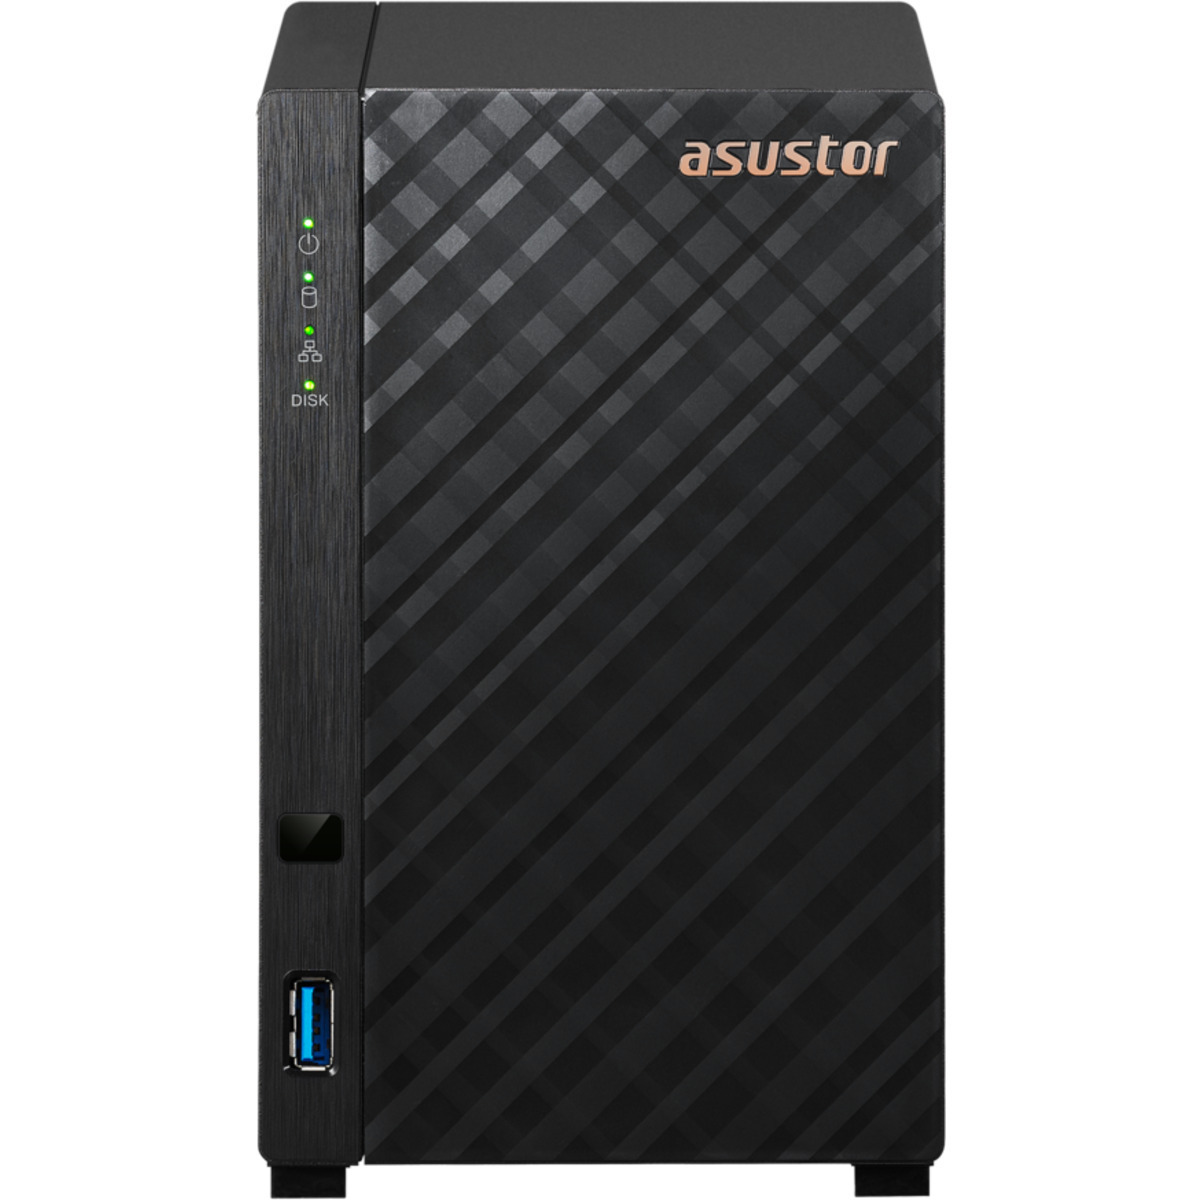 ASUSTOR DRIVESTOR 2 Lite AS1102TL 12tb 2-Bay Desktop Personal / Basic Home / Small Office NAS - Network Attached Storage Device 2x6tb Western Digital Red Pro WD6003FFBX 3.5 7200rpm SATA 6Gb/s HDD NAS Class Drives Installed - Burn-In Tested DRIVESTOR 2 Lite AS1102TL